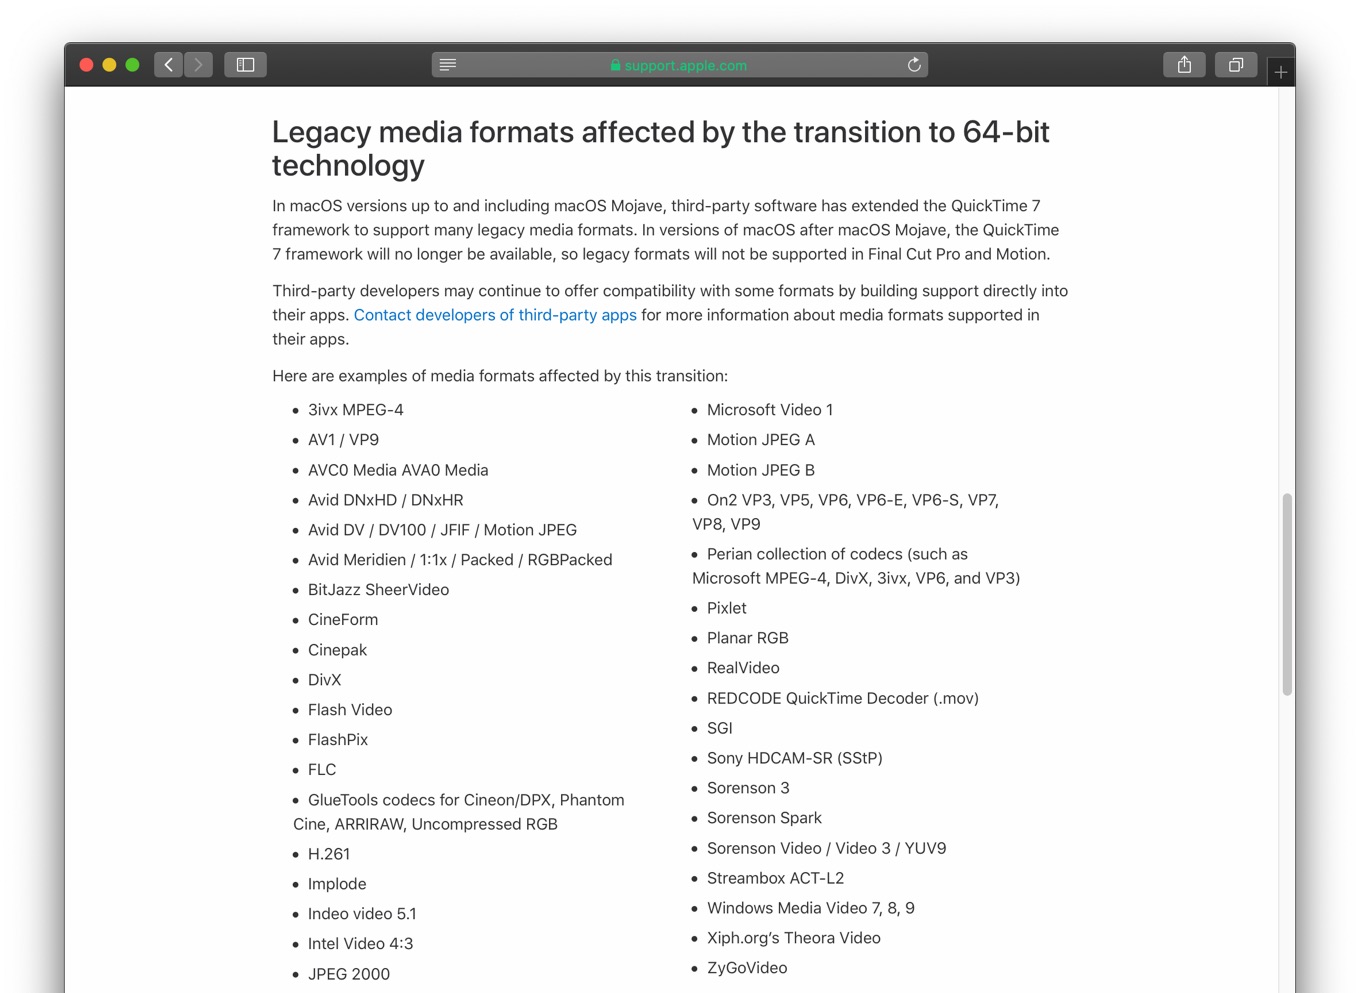 Legacy media formats affected by the transition to 64-bit technology